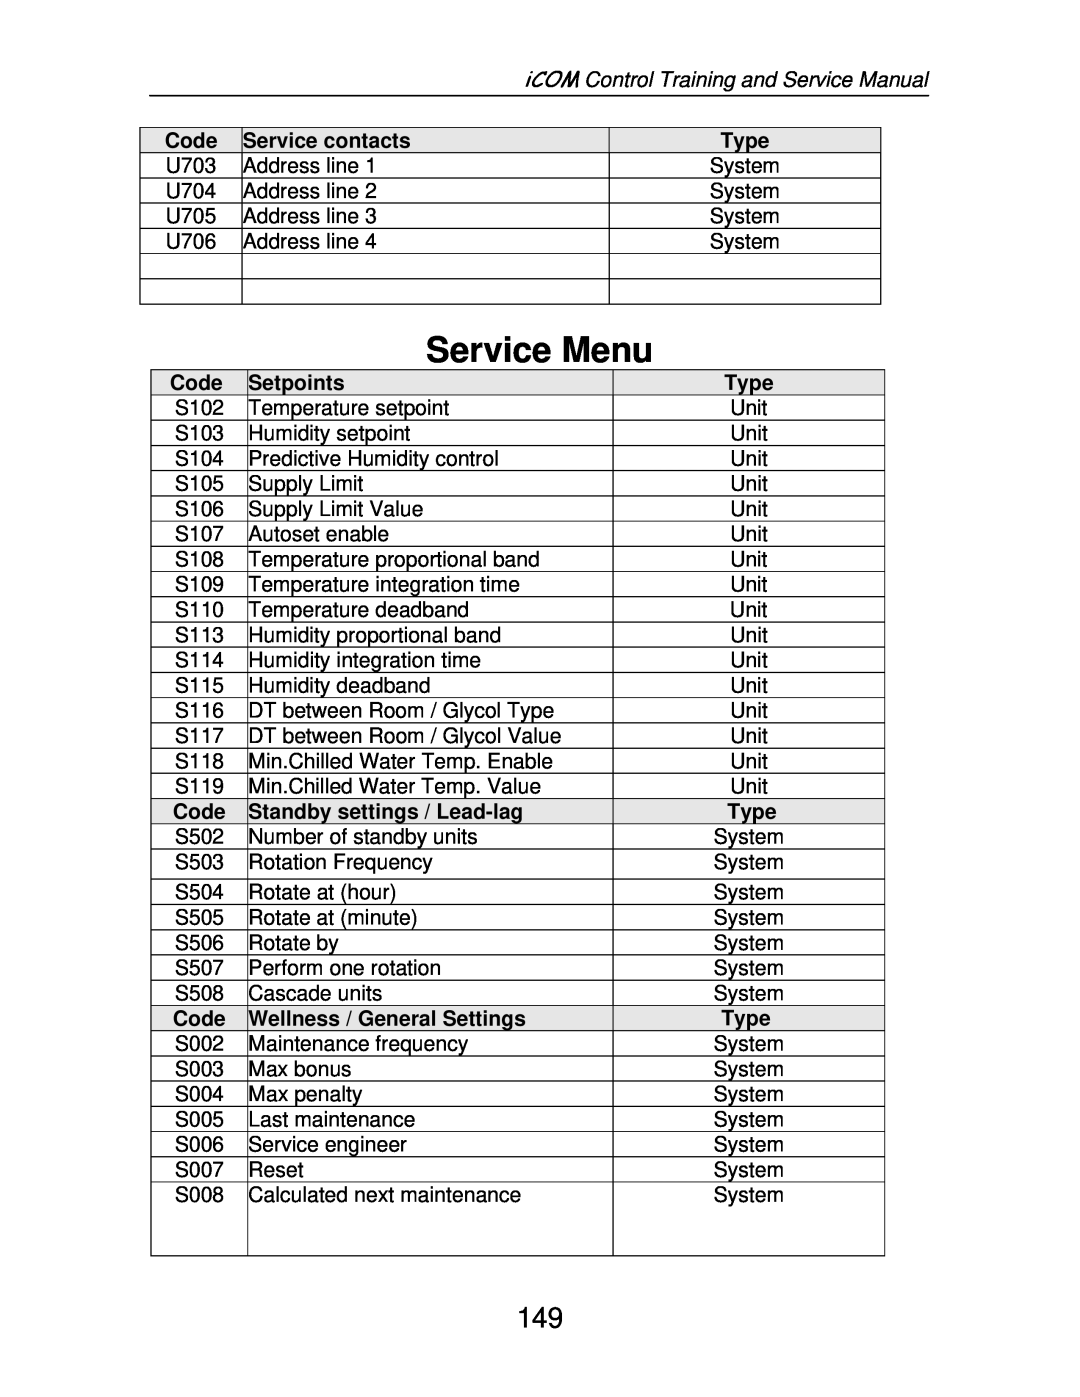 Liebert TM-10098 service manual Service Menu, Code, Service contacts, Setpoints, Type, Standby settings / Lead-lag 